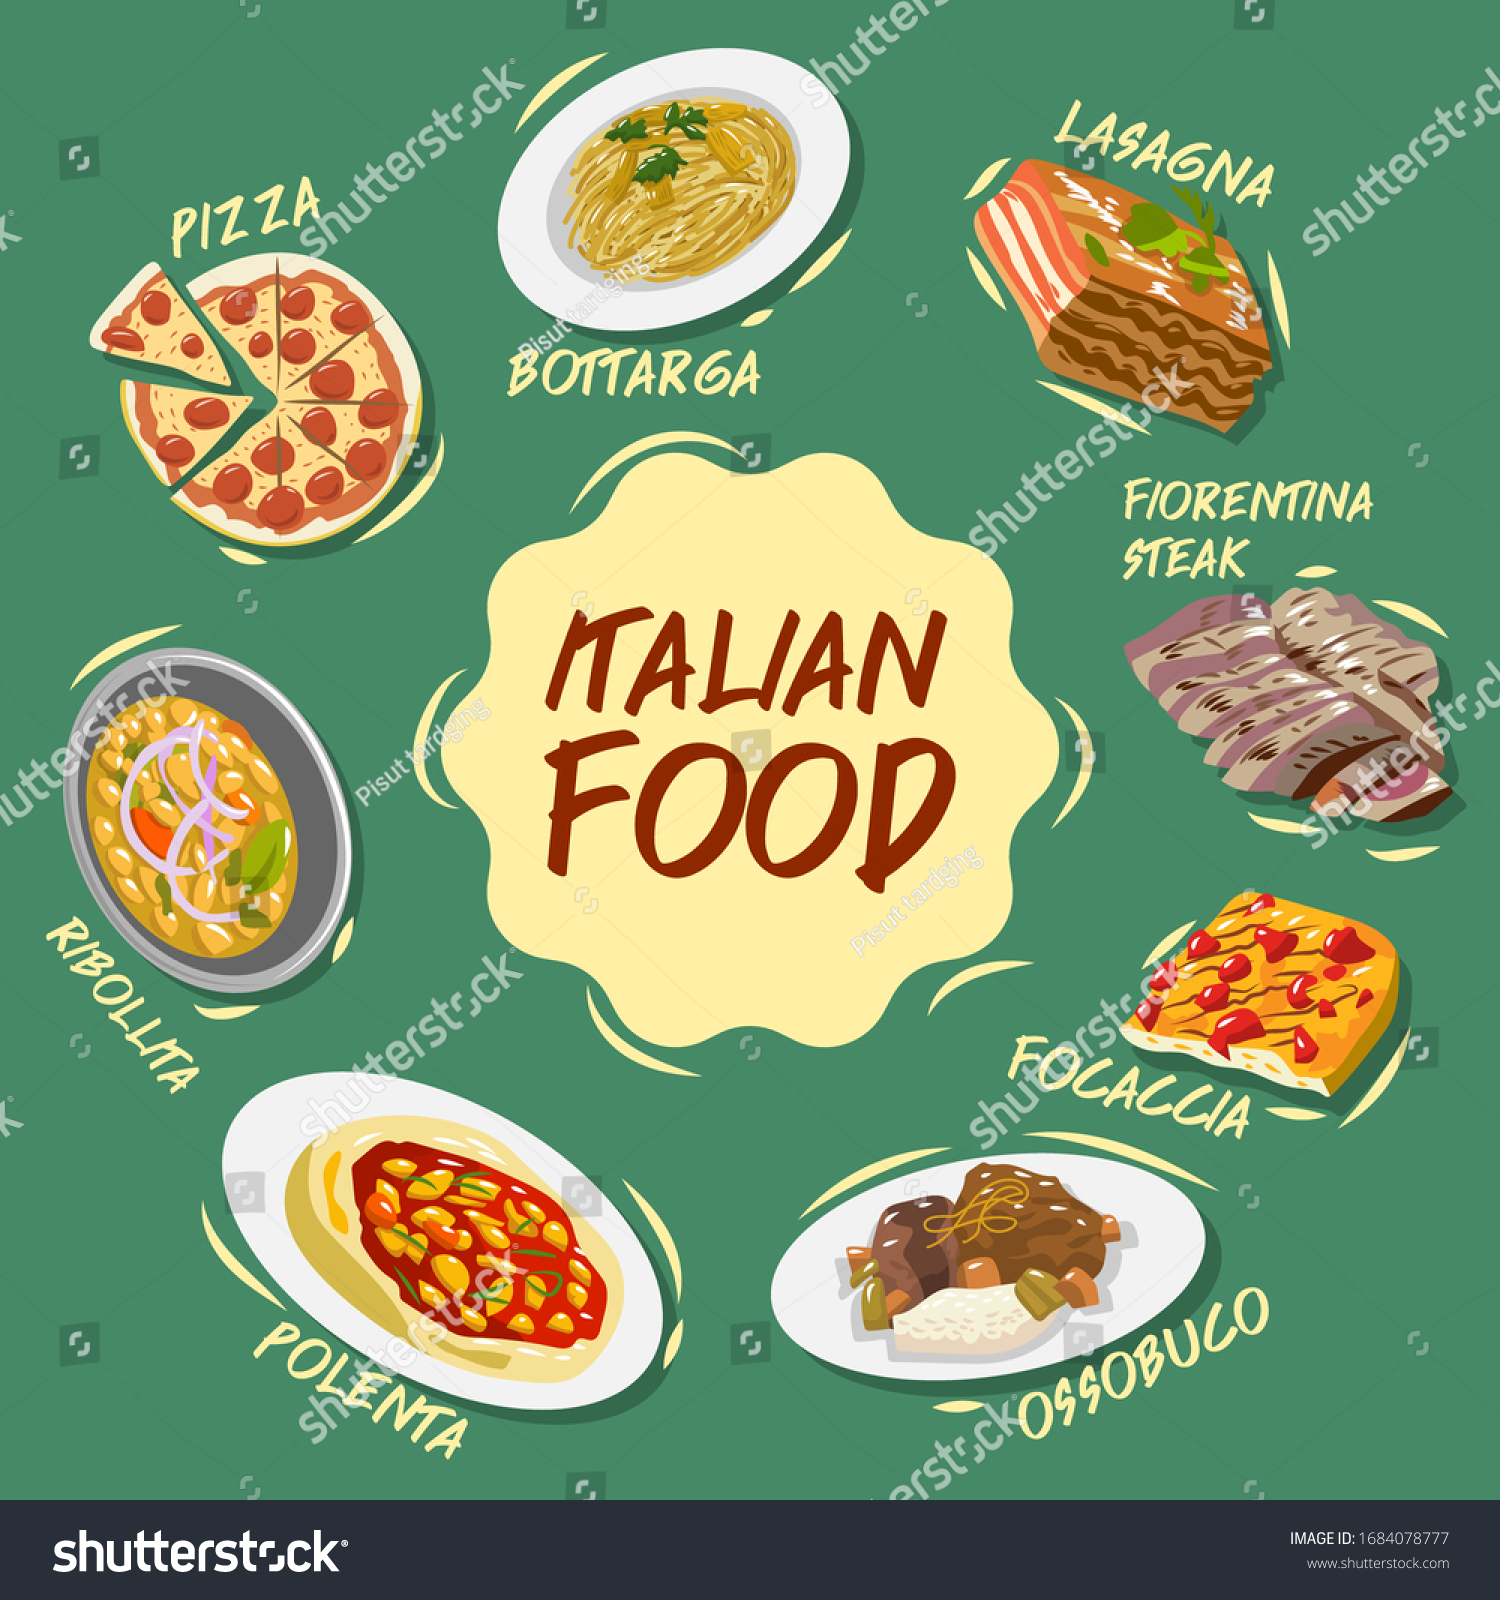 Italian Food Vector Set Collection Graphic Stock Vector (Royalty Free ...